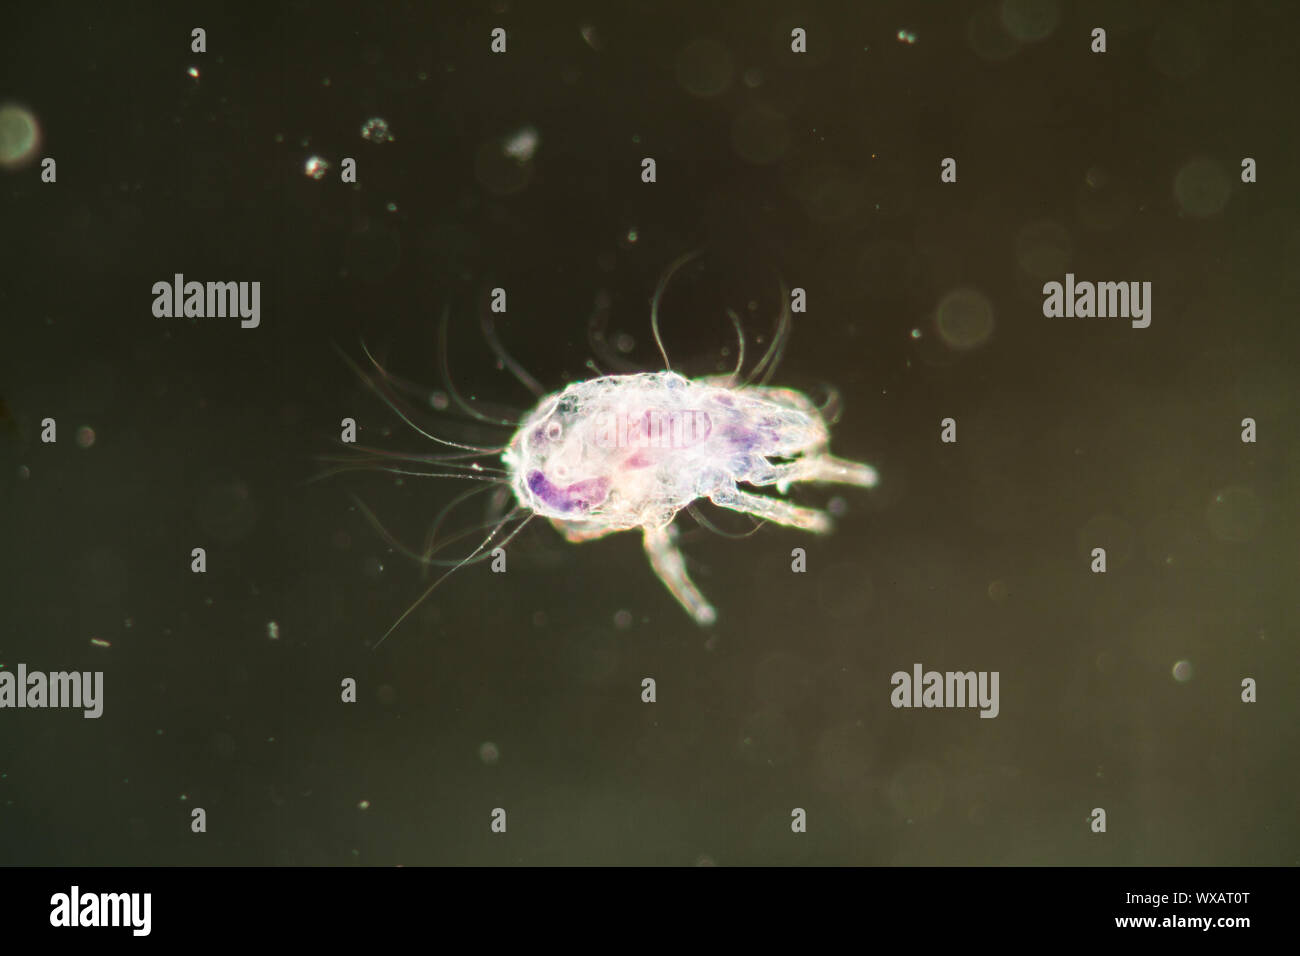 House dust mite under the microscope 50x Stock Photo